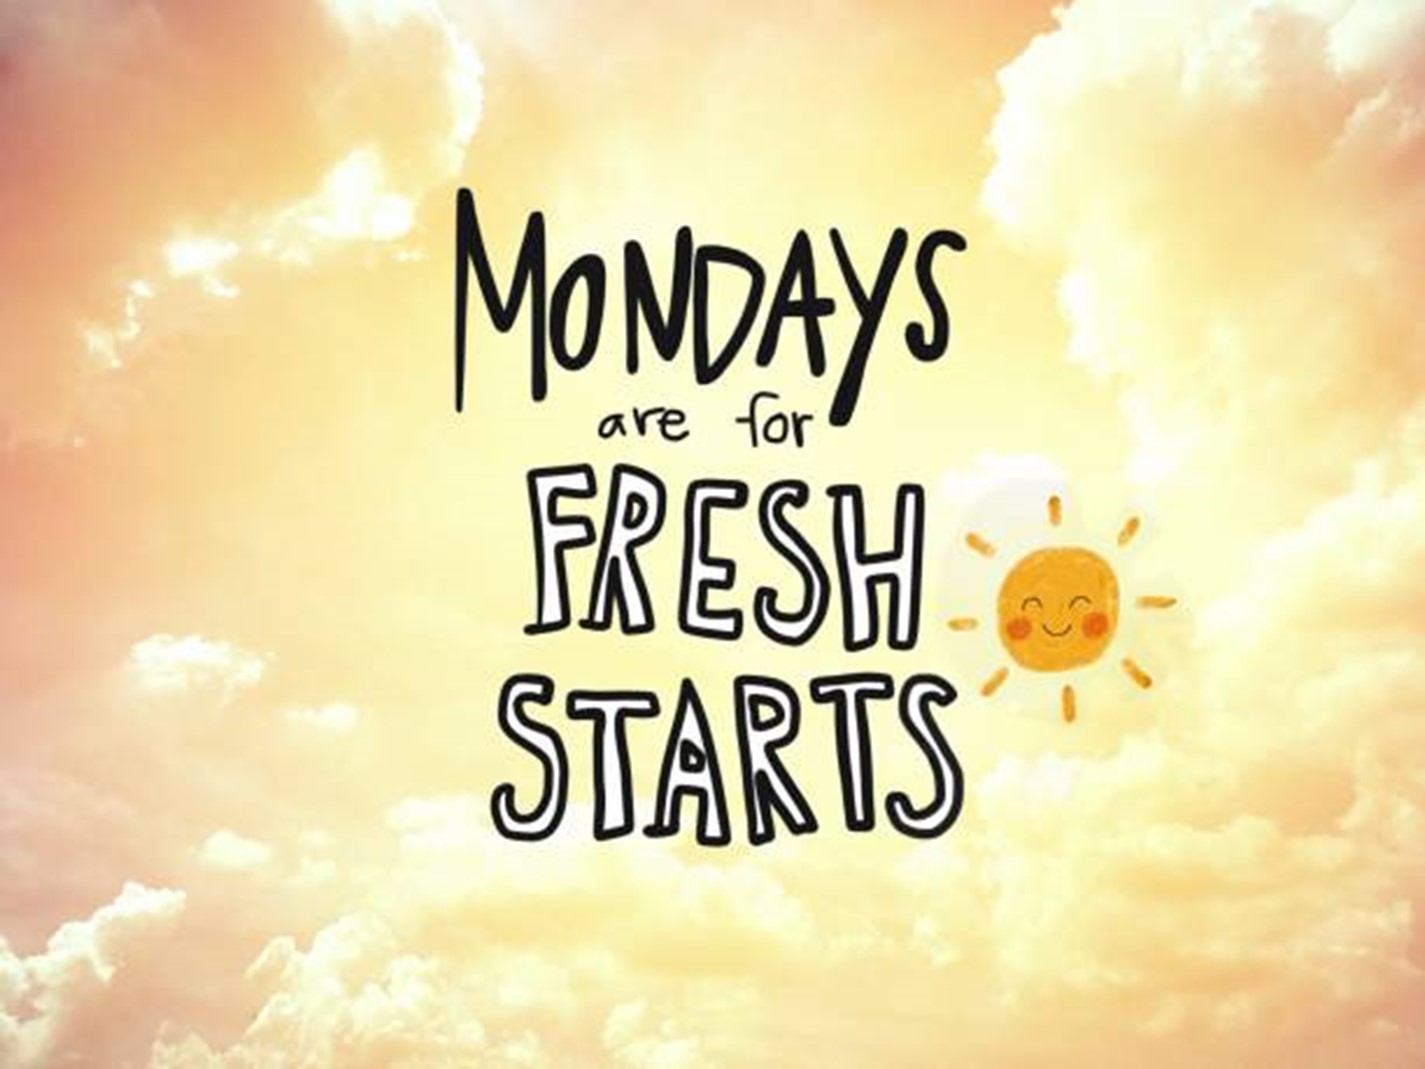 Mondays are for fresh starts